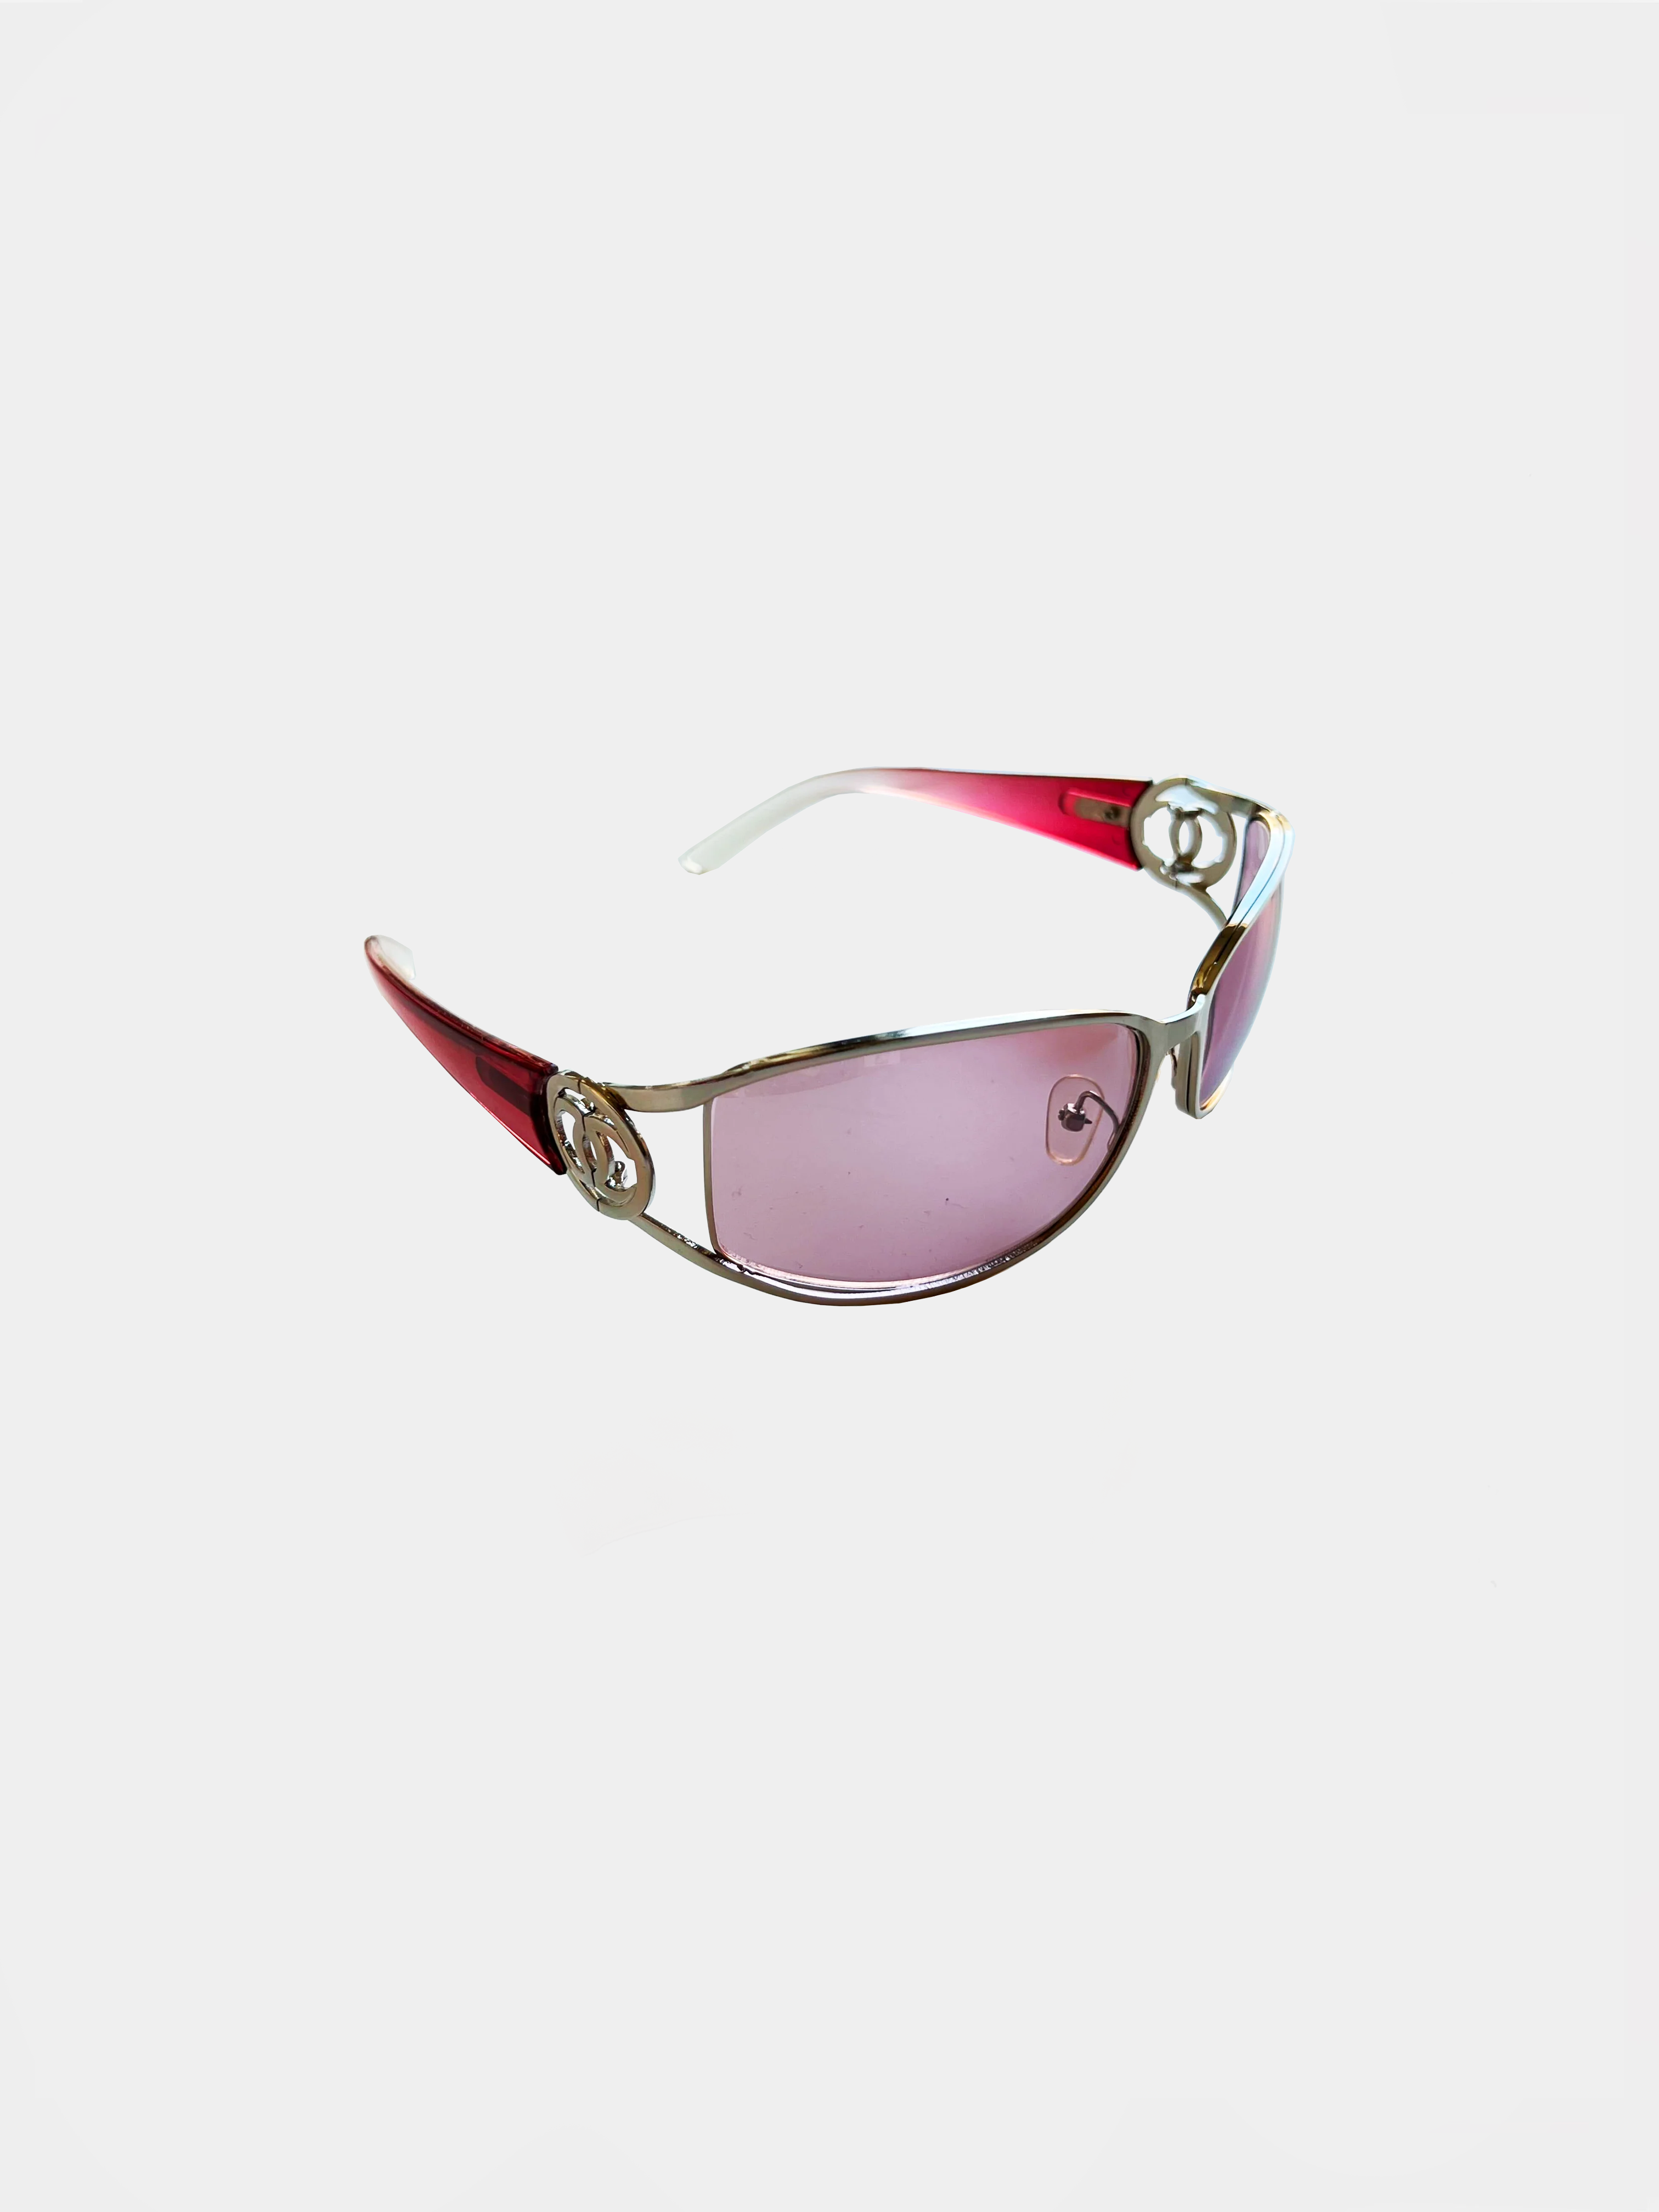 Sold at Auction: Chanel LOT 2 Sunglasses Semi Rimless Pink Yellow